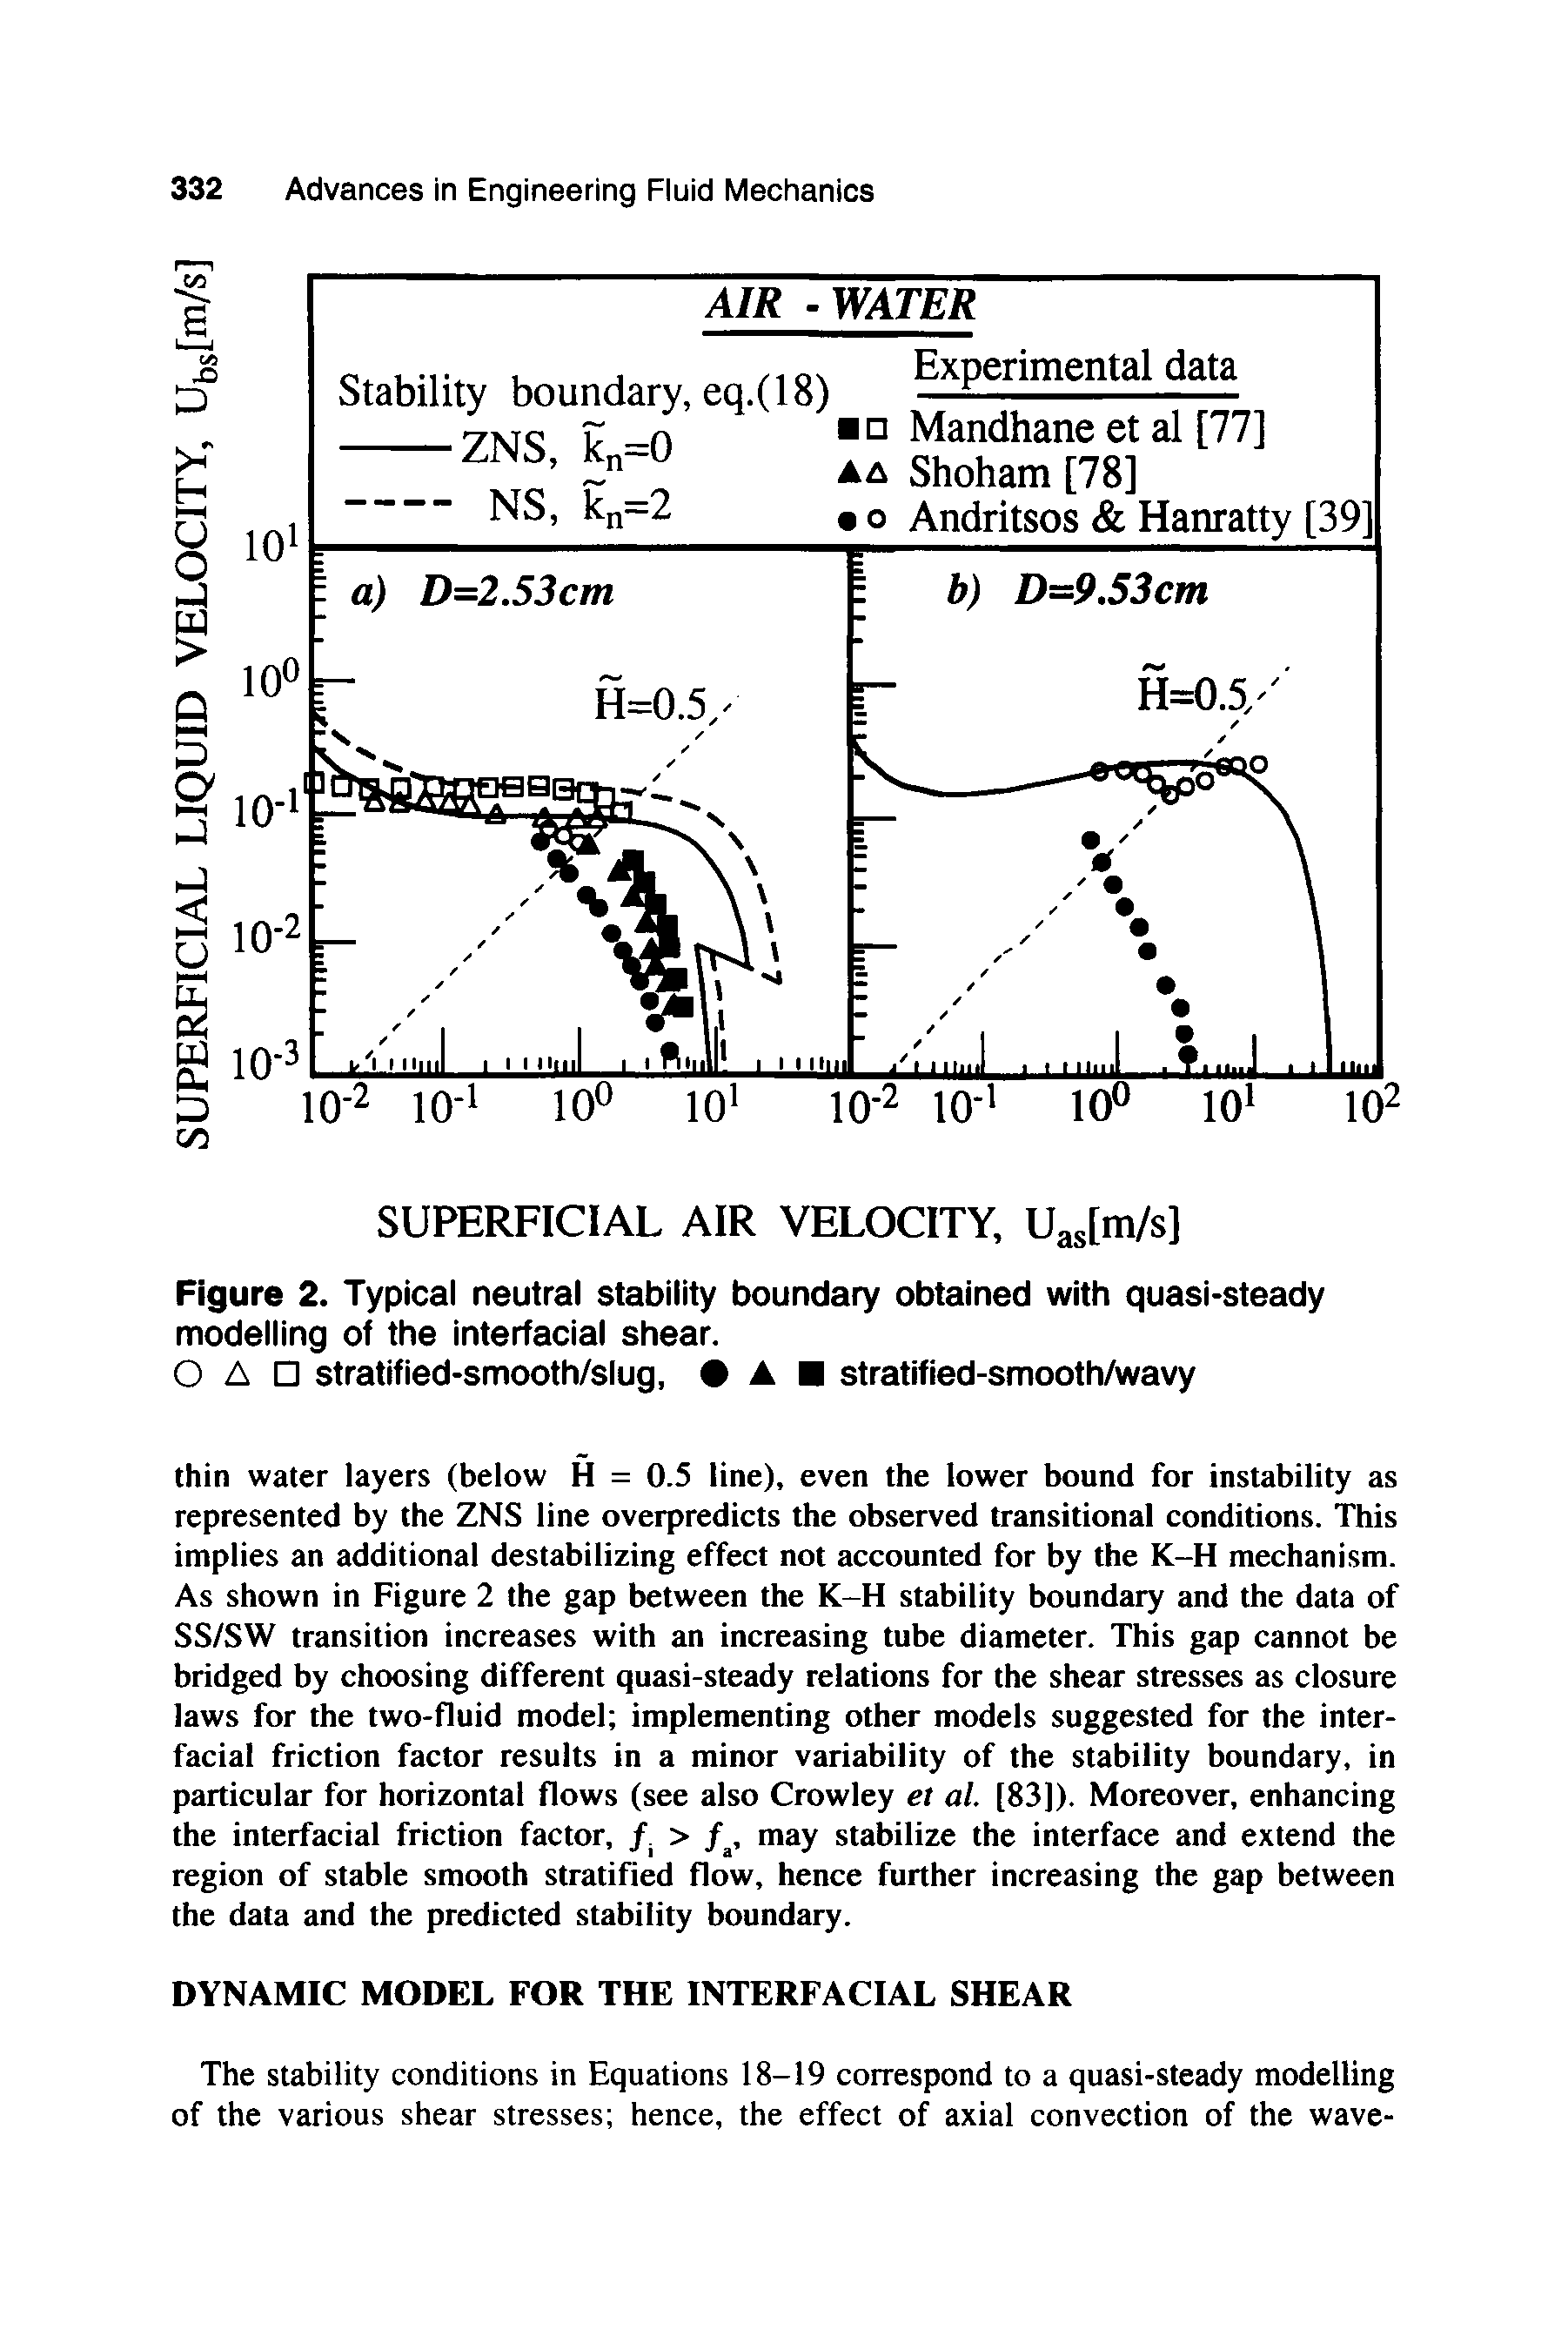 Figure 2. Typical neutral stability boundary obtained with quasi-steady modelling of the interfacial shear.